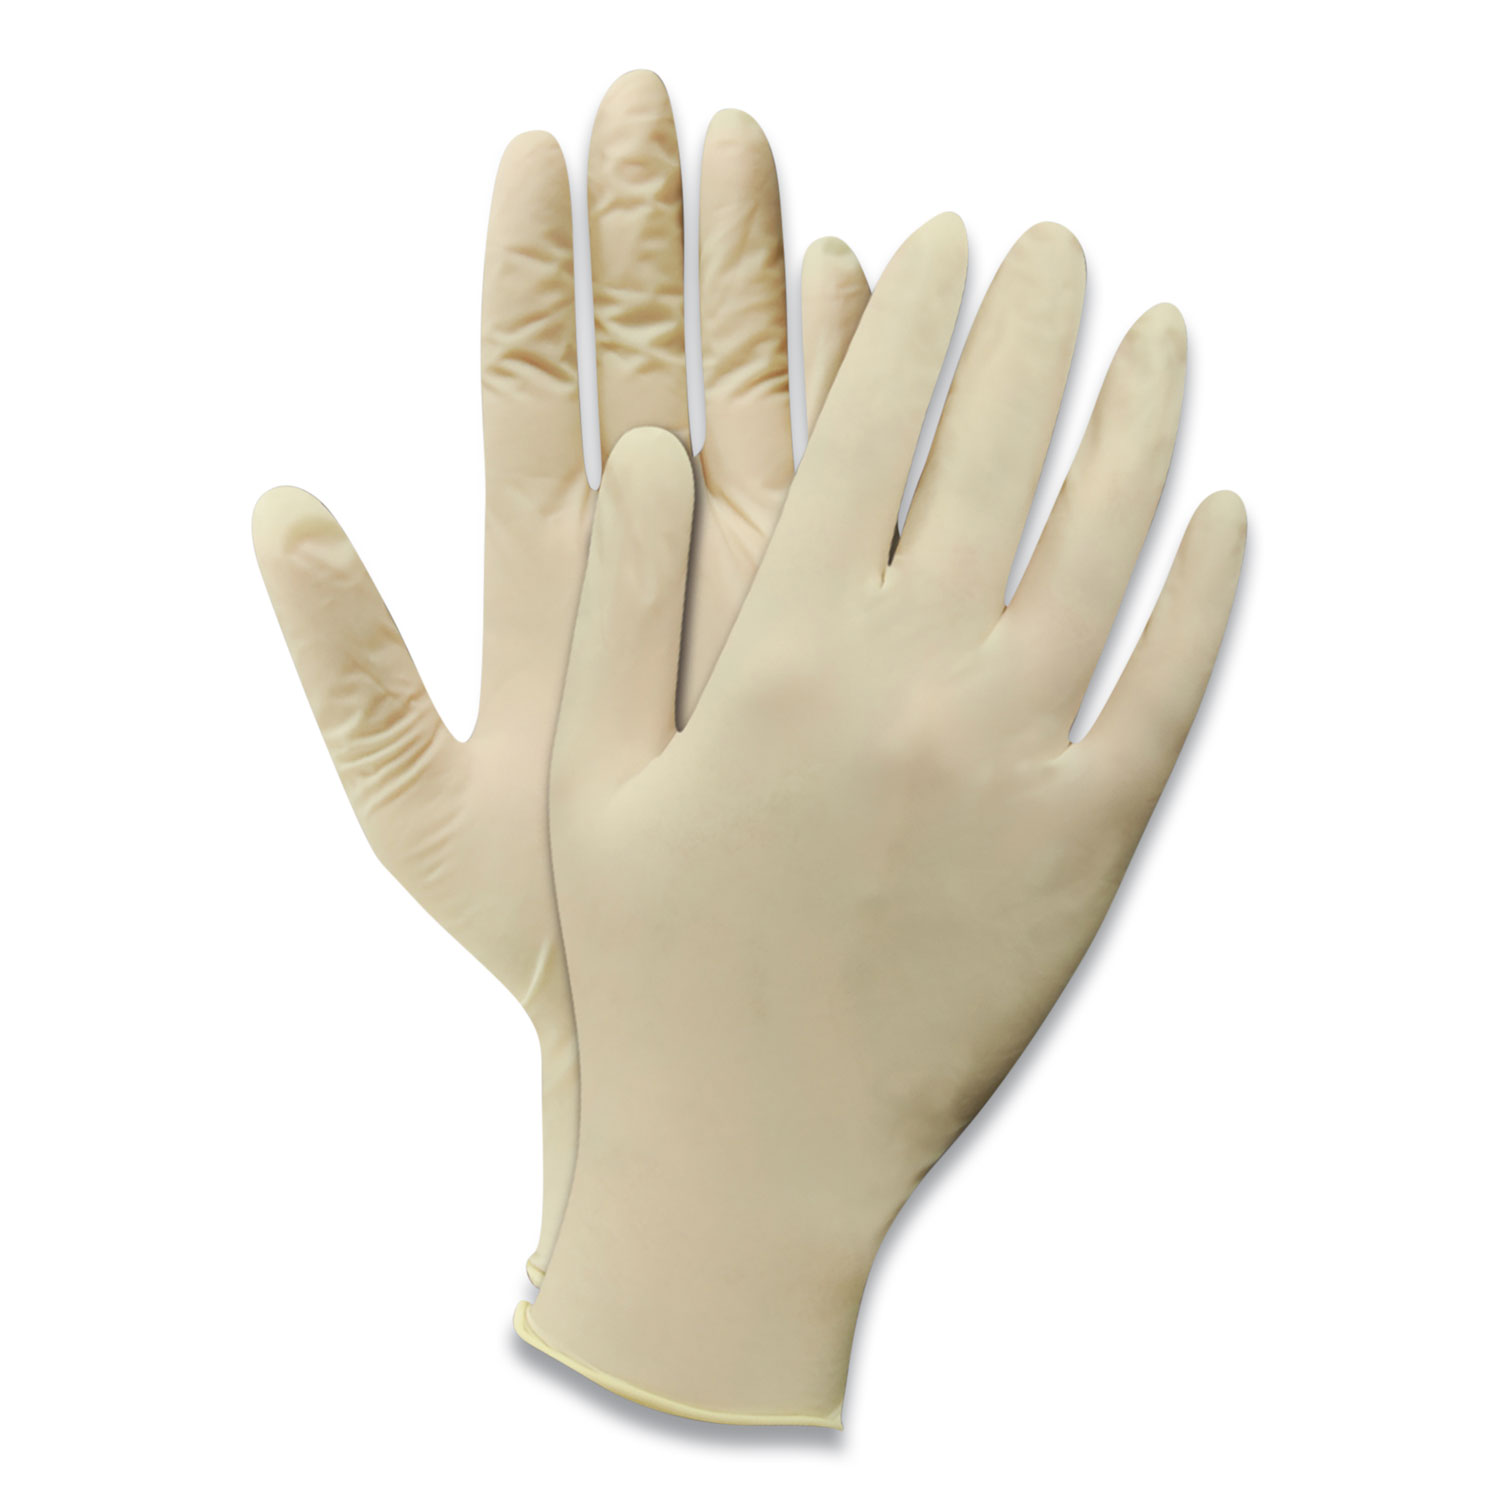  GN1 AG44100T Powdered Disposable Latex Gloves, Natural White, Large, 100/Box (GN1AG44100T) 